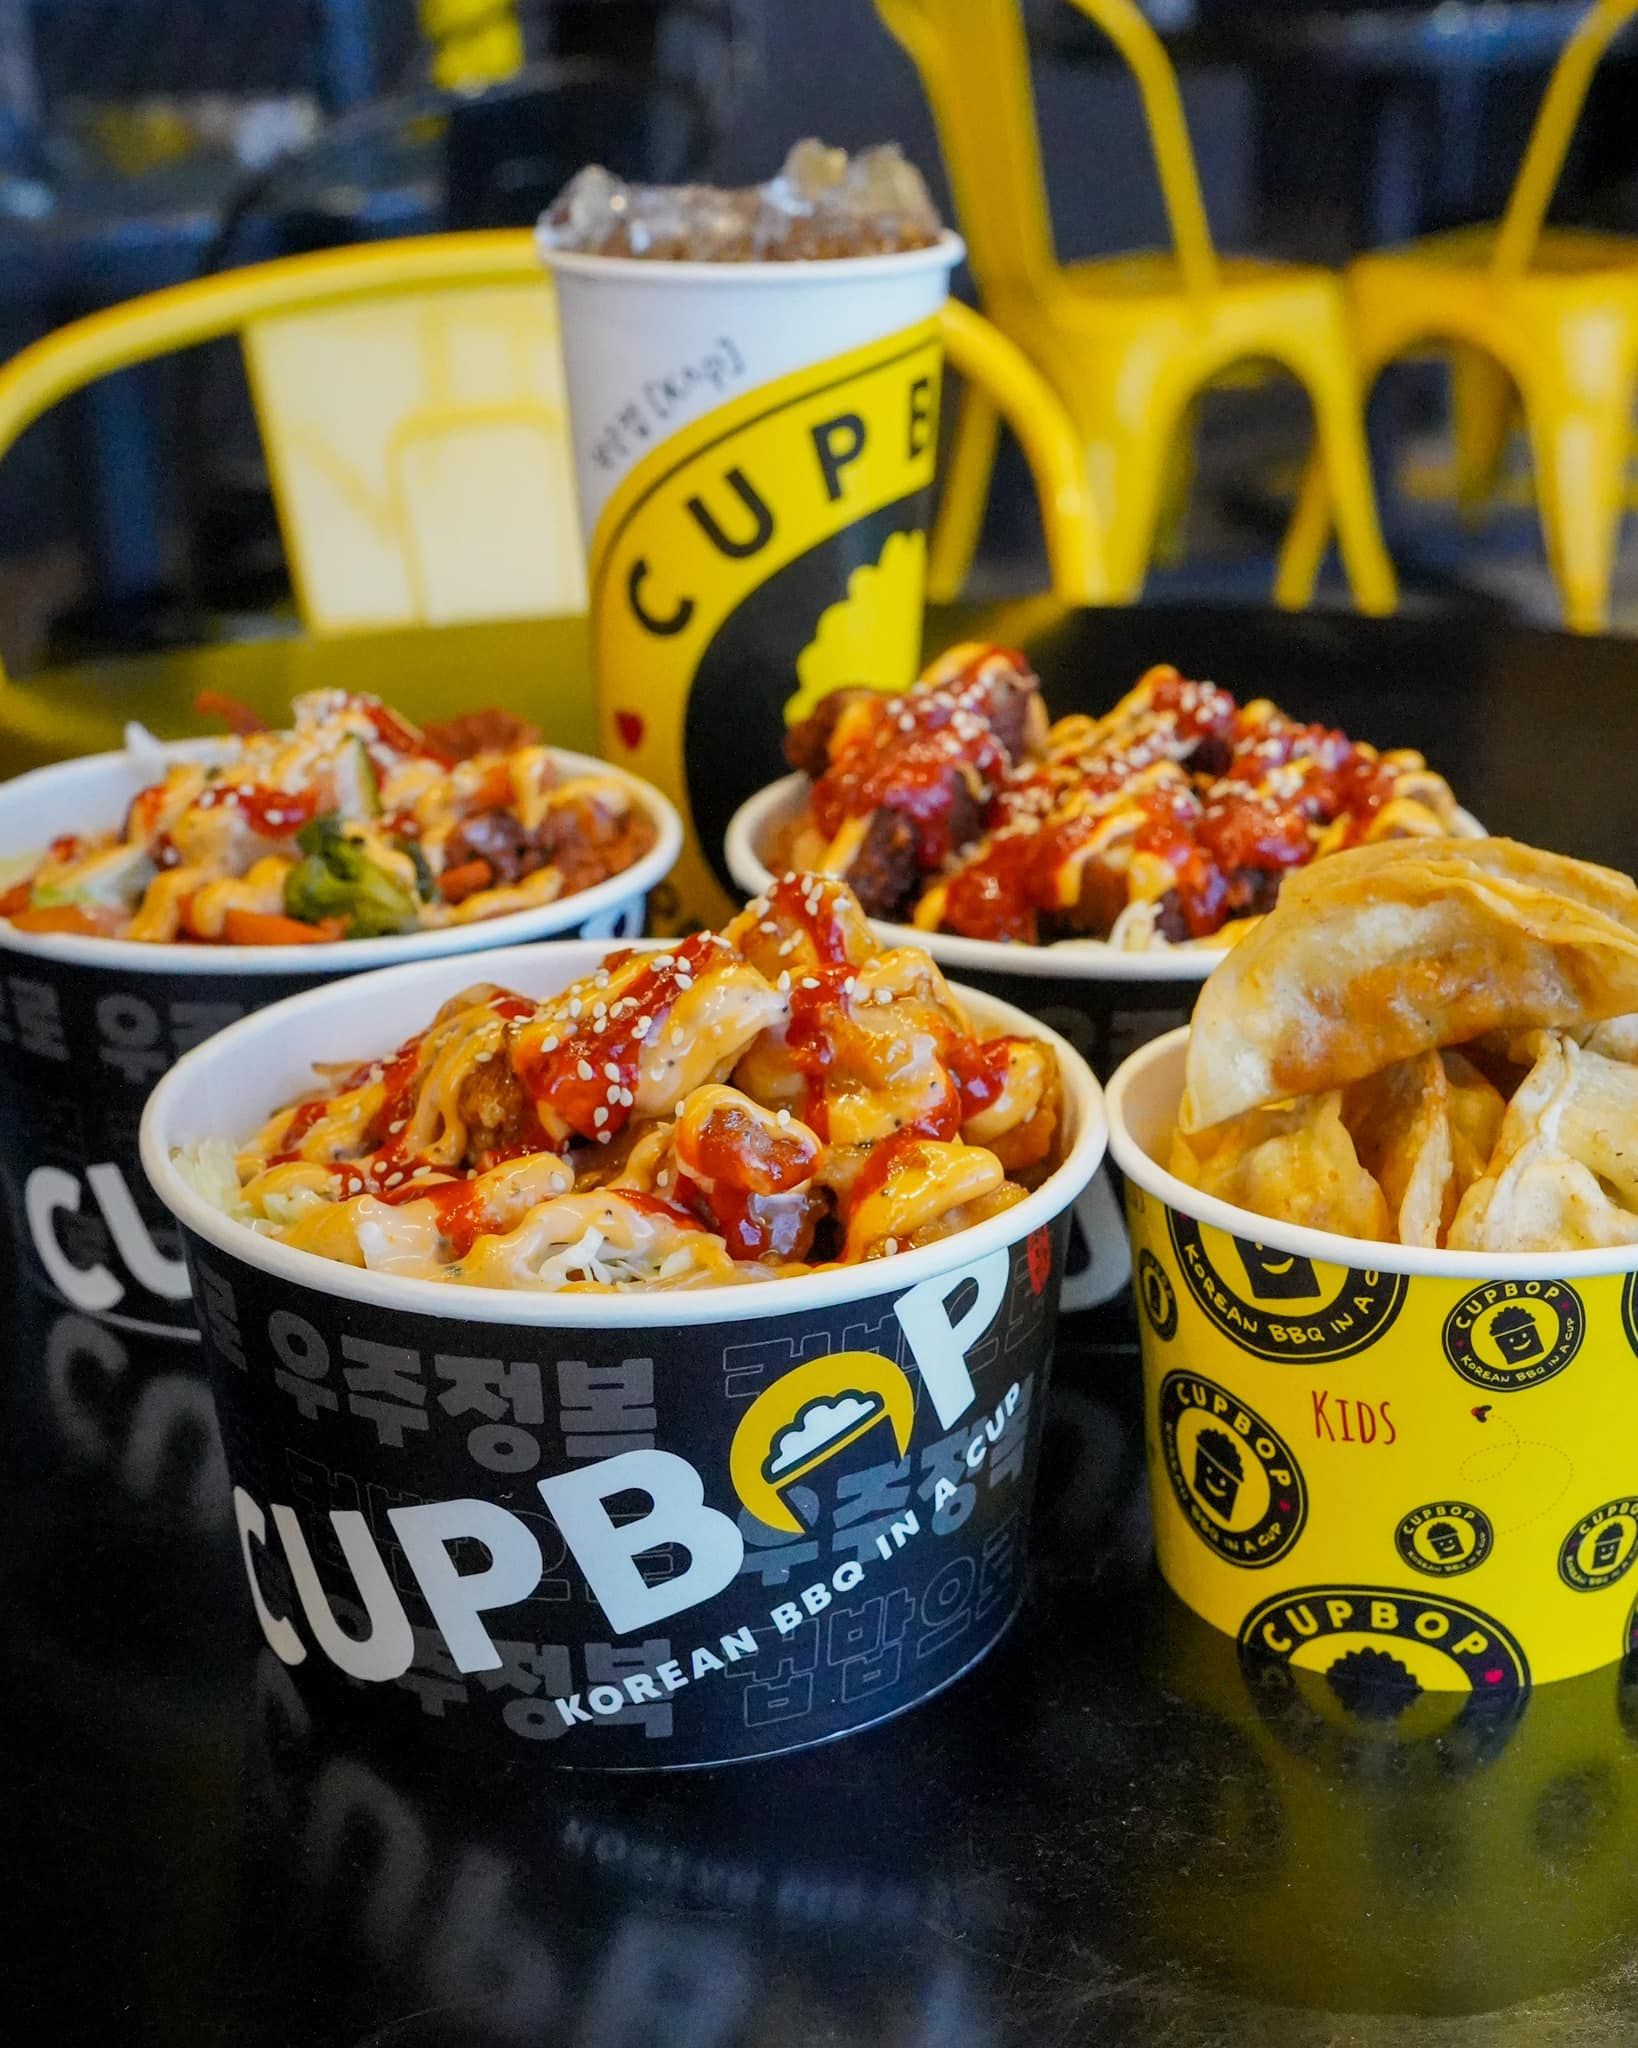 Cupbop Reveals Plans to Boost National Franchise Expansion Efforts Following Rapid Brand Success